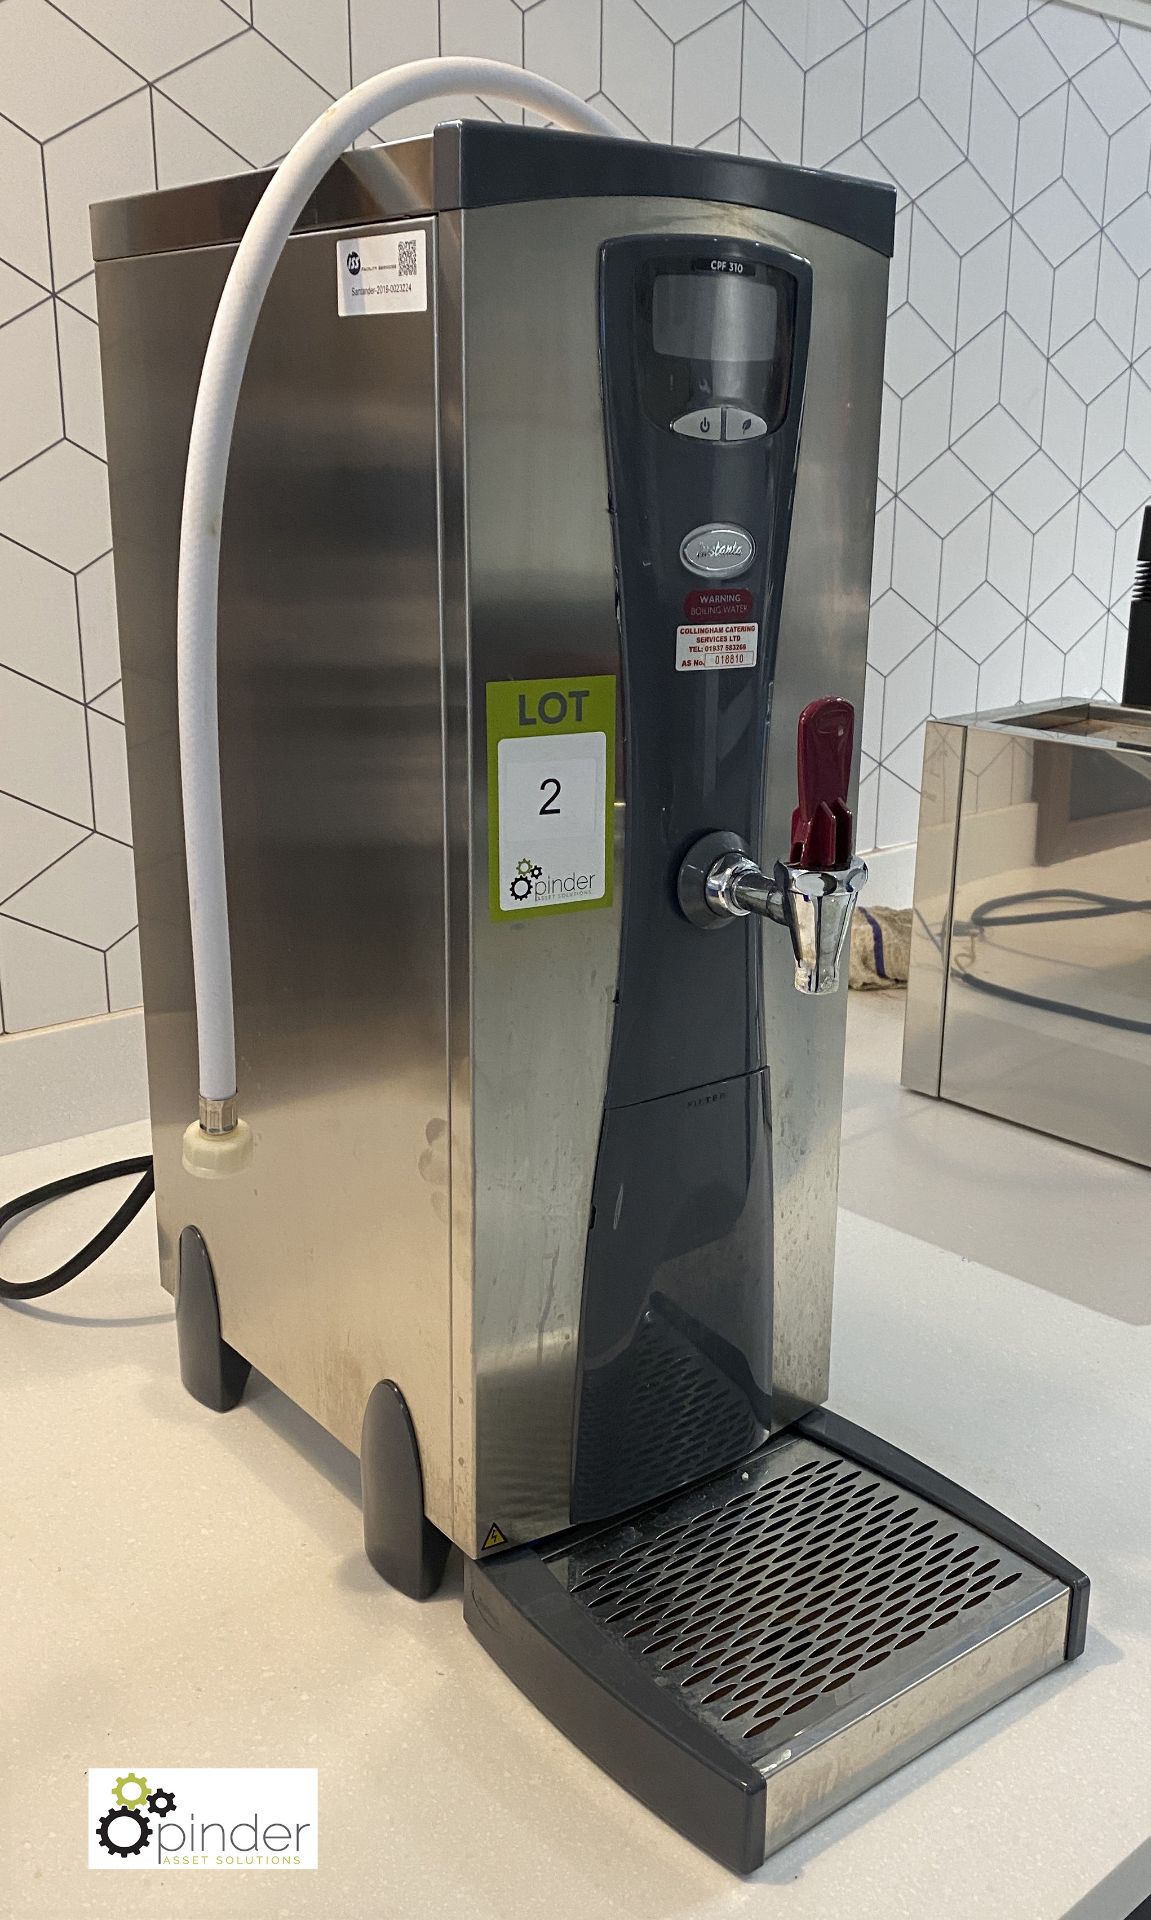 Instanta CPF310 Water Boiler, 230volts (lot location – Parkview Restaurant Main Servery – first